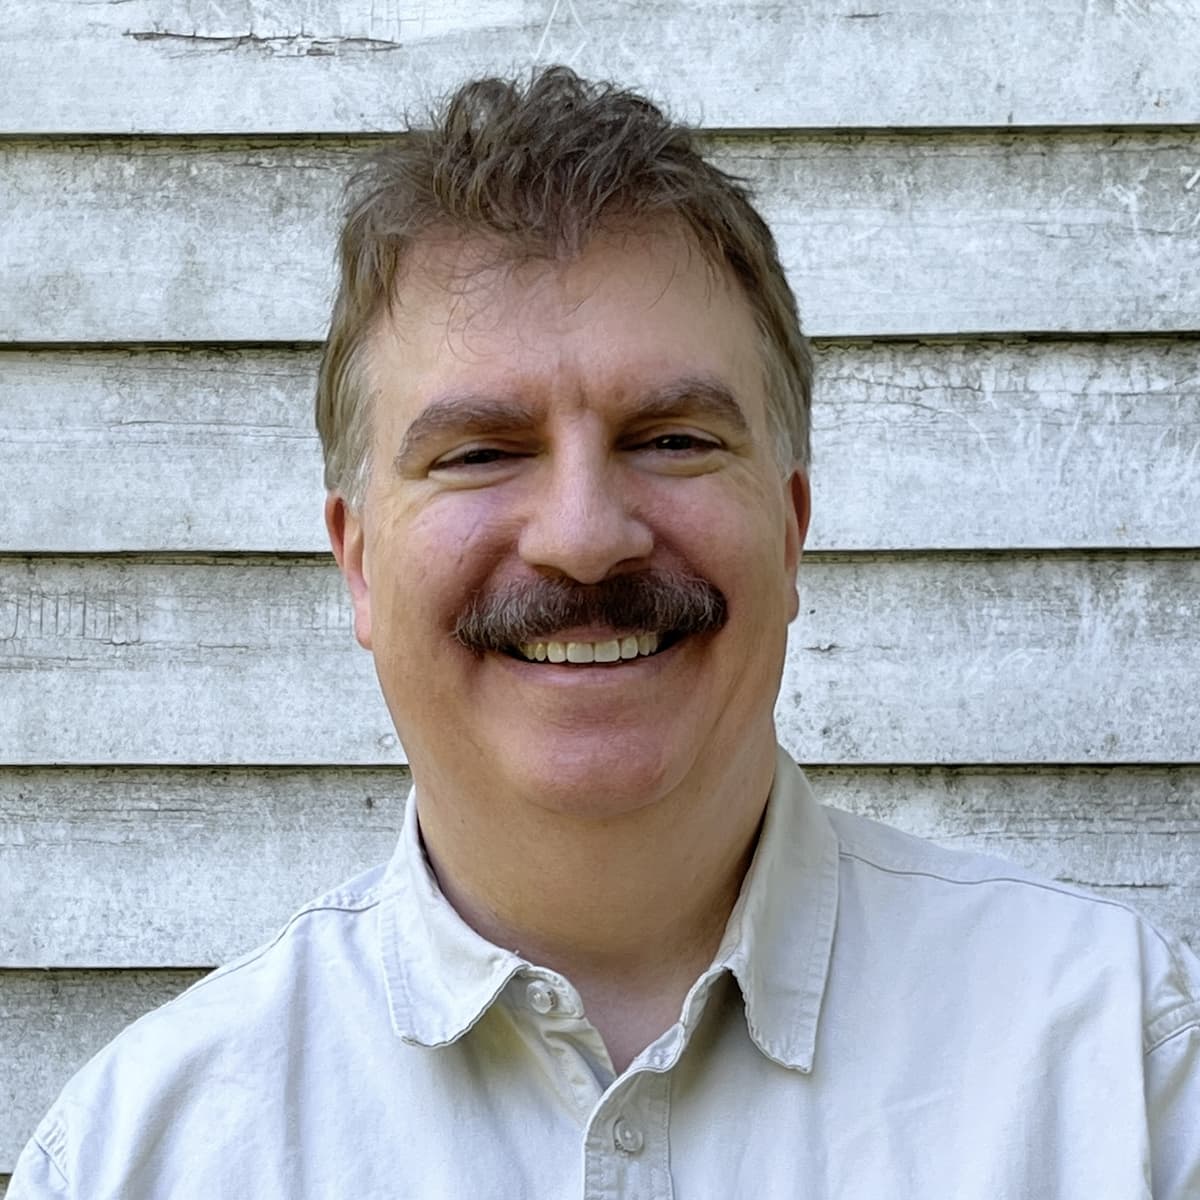 A white man with short hair and a mustache, wearing a button up shirt, is looking at the camera and smiling.